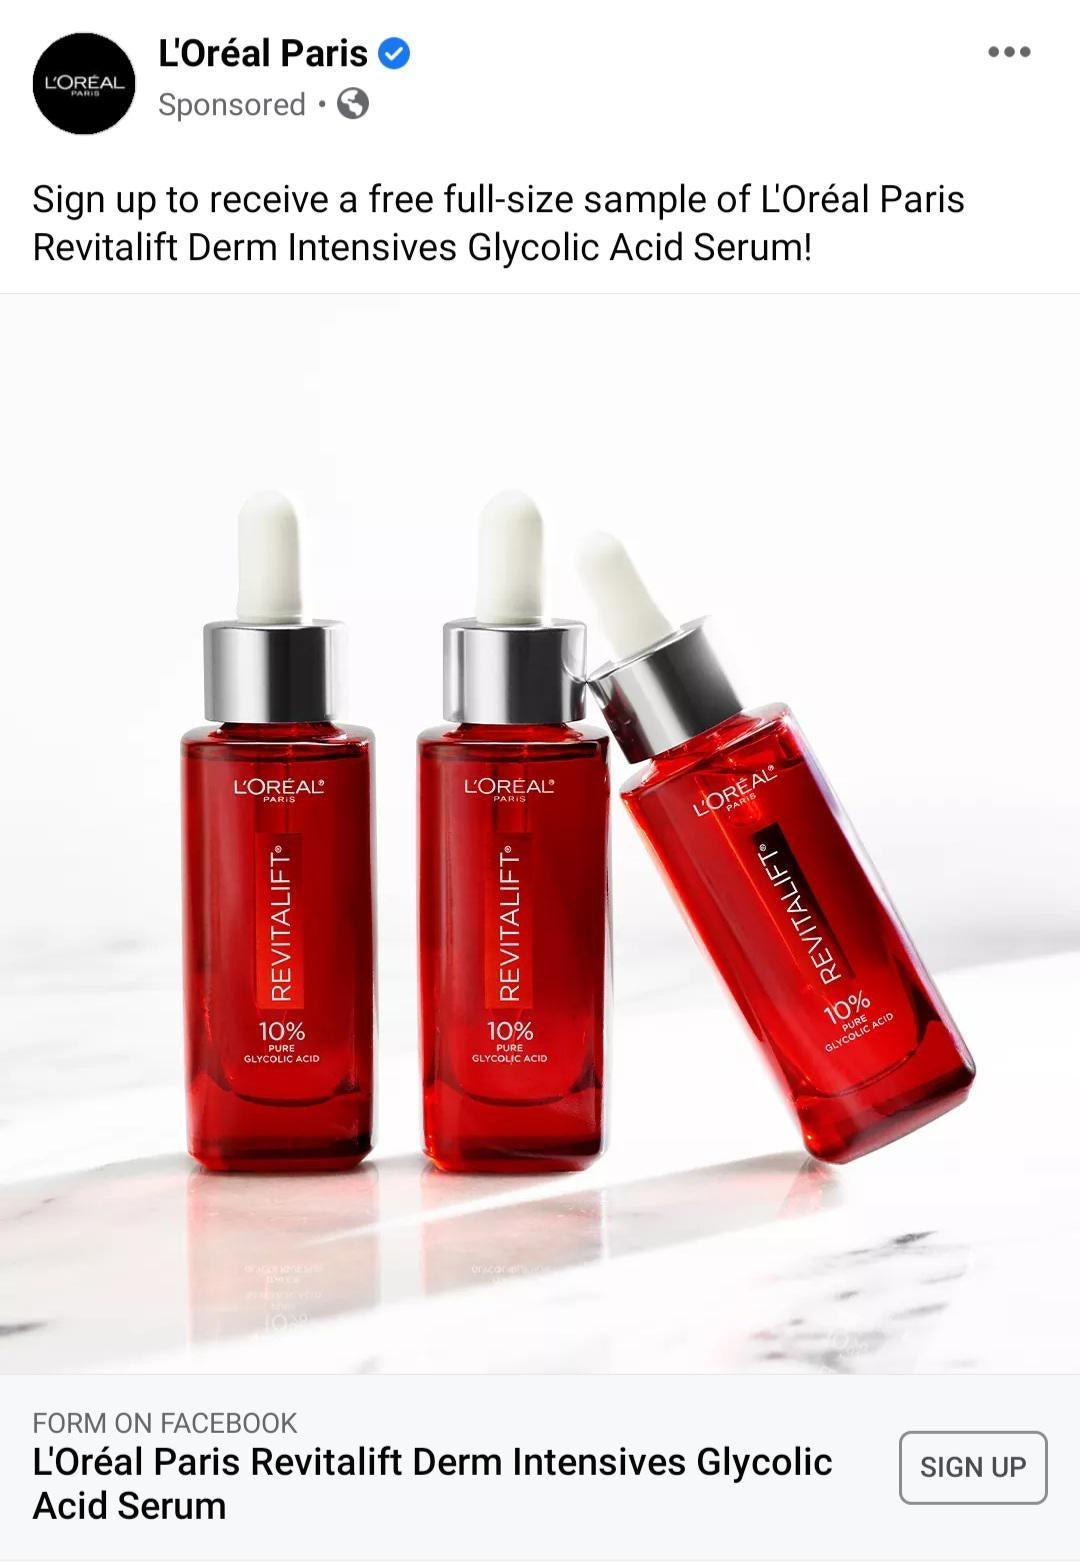 Screenshot of Sponsored ad on Facebook for a FREE full-size sample of Revitalift Derm Intensives Glycolic Acid Serum